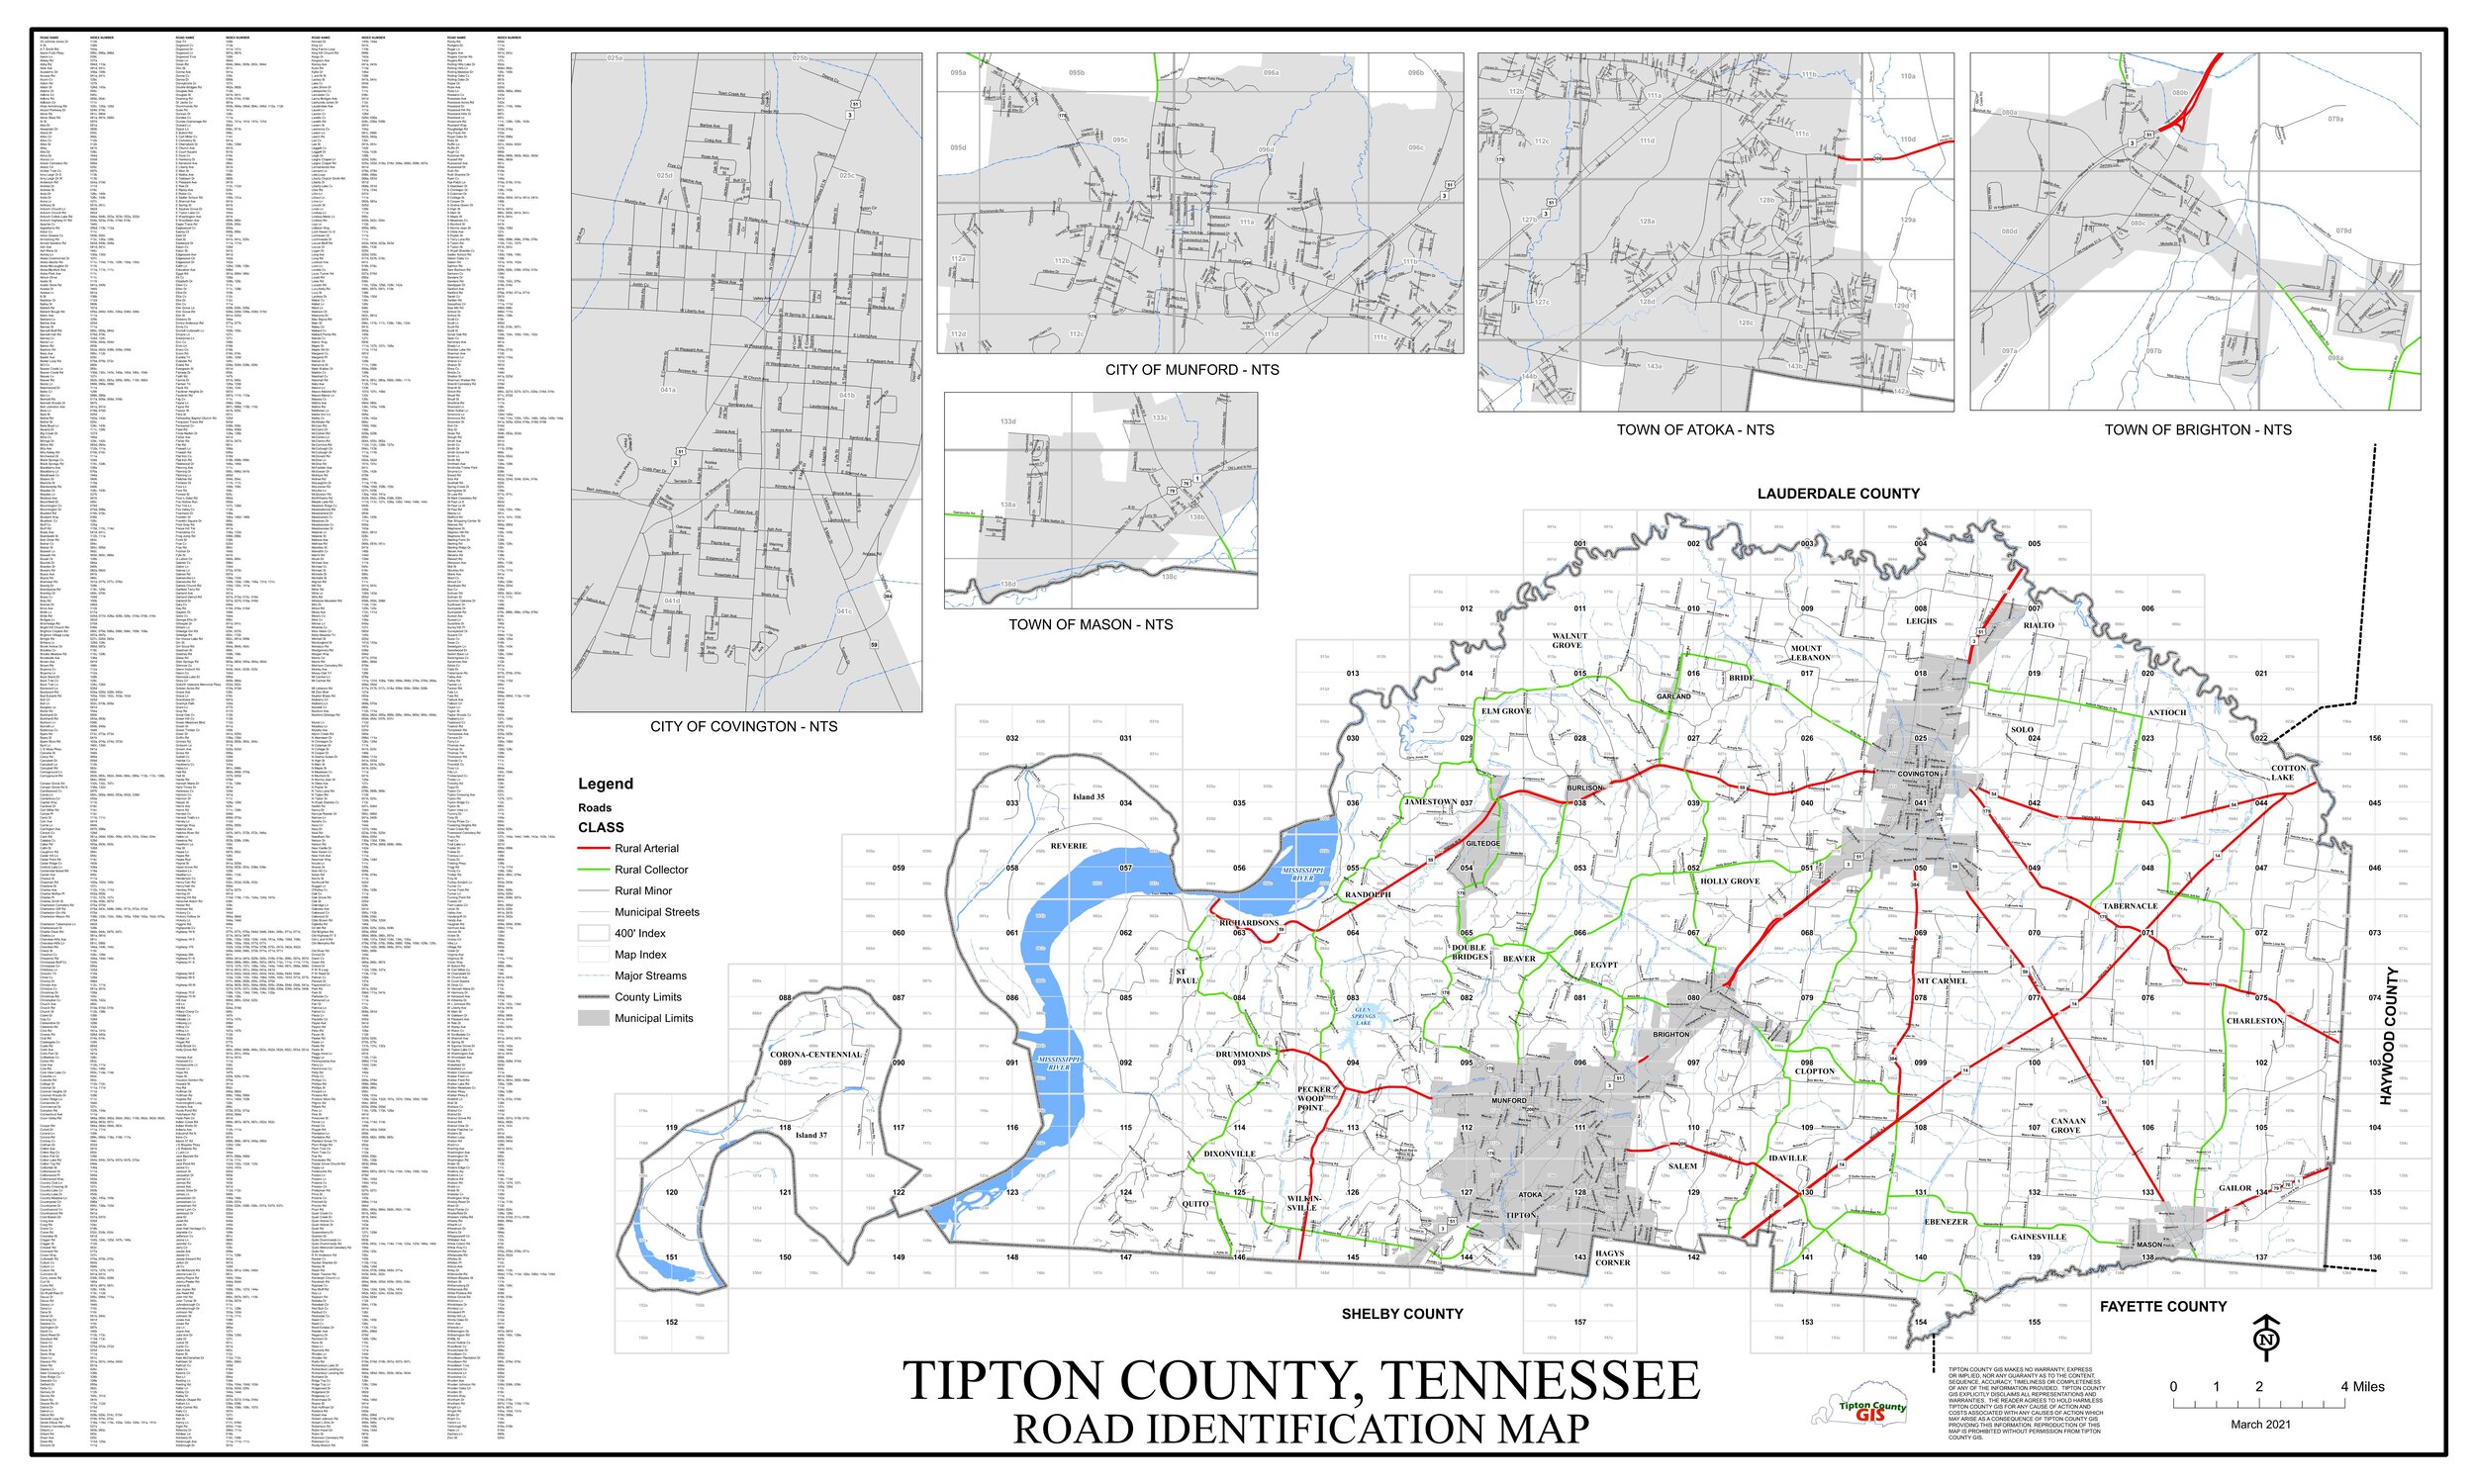 Tipton County, Tennessee Road Identification Map